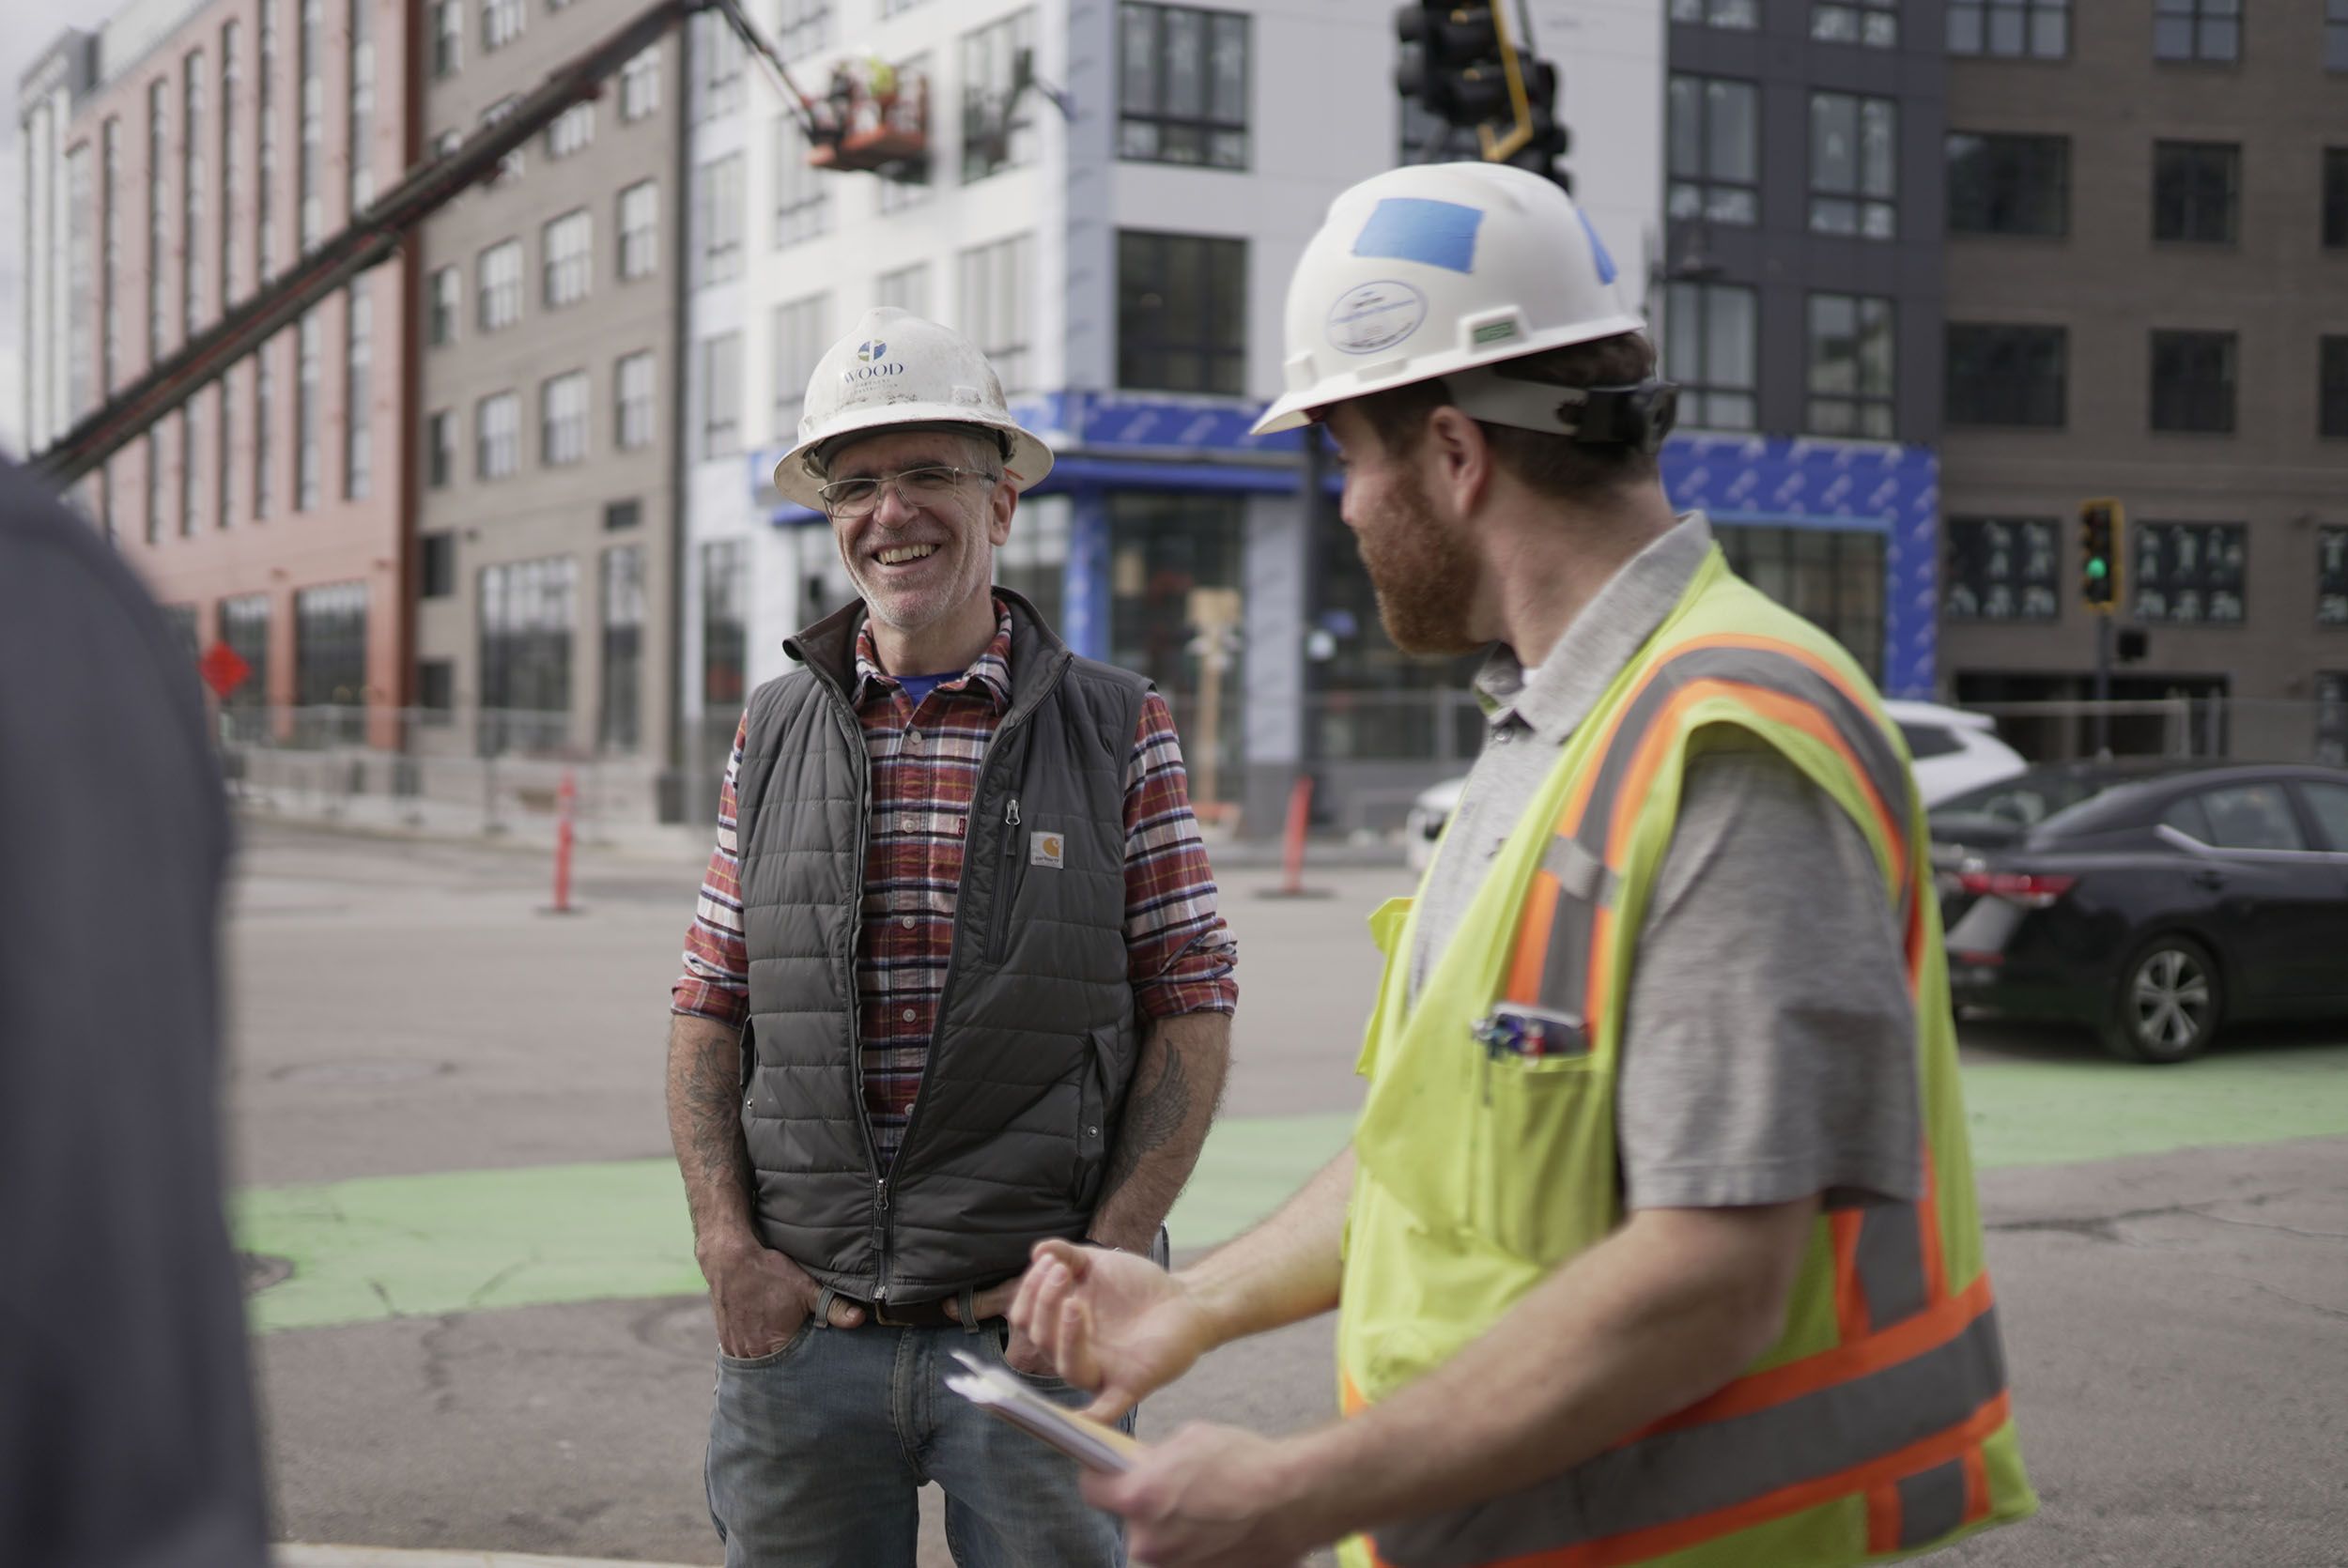 Two men in hard hats working on construction site talking and smiling.